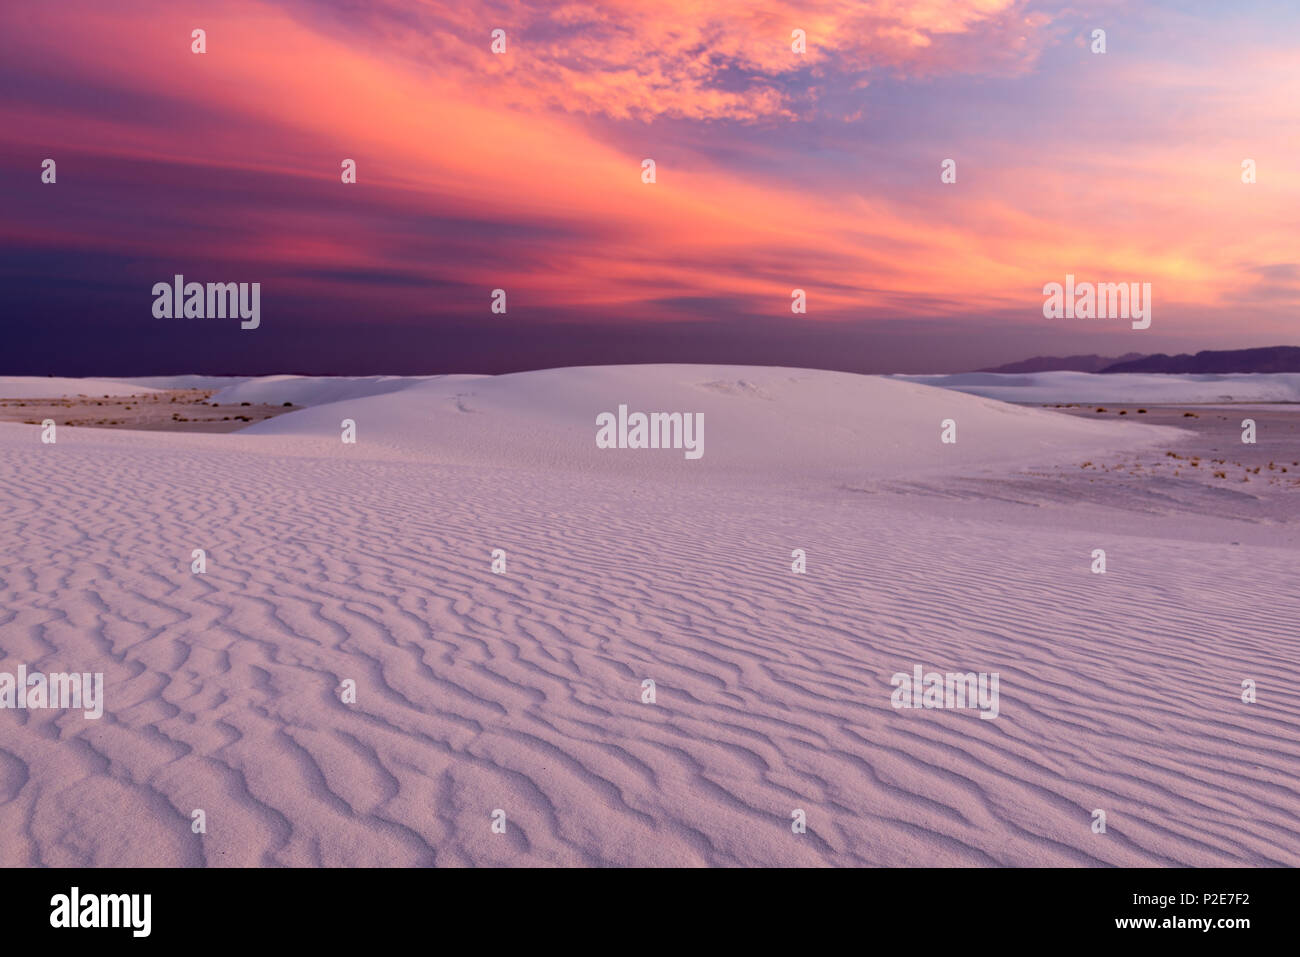 Tranquil image of white sand dunes and beautiful sunset sky, White Sands National Monument, New Mexico, USA Stock Photo